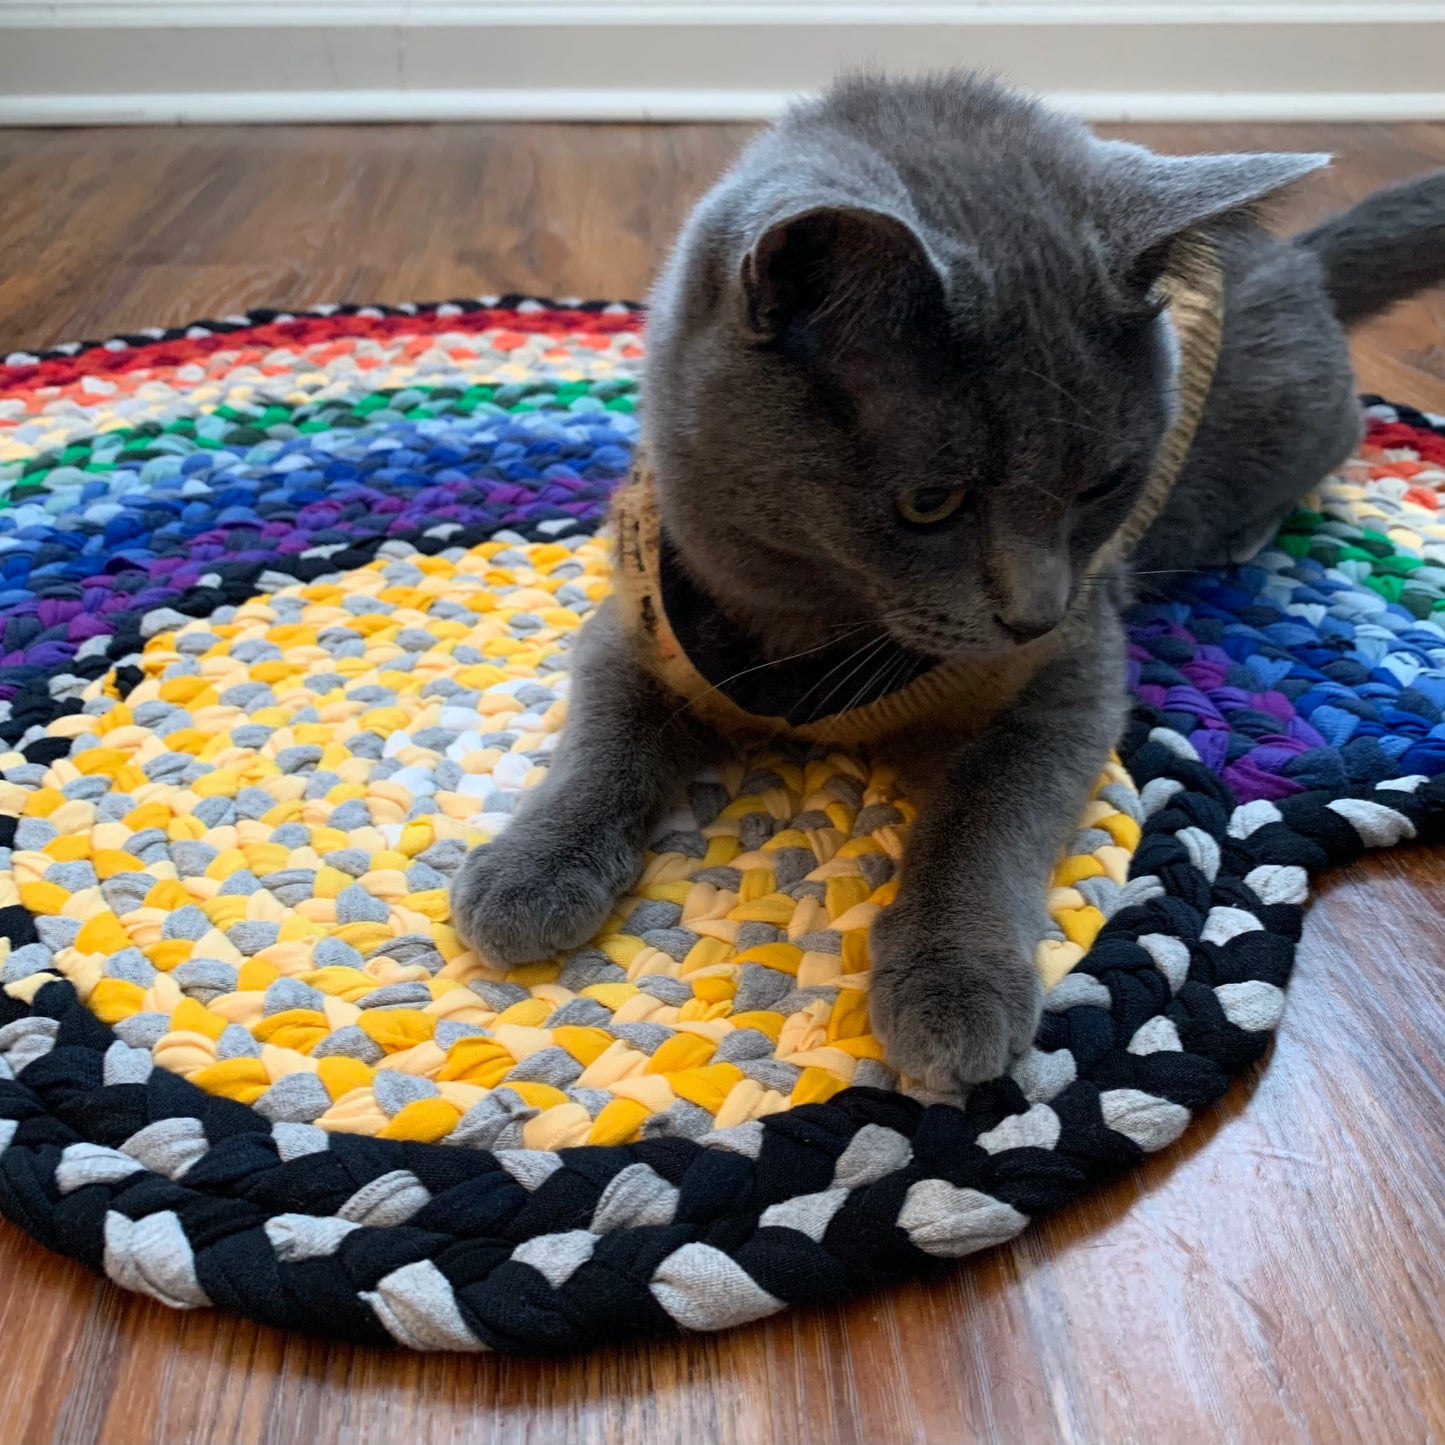 Rainbow sun rug with grey shorthair kitten laying on top, looking quite pleased with herself.